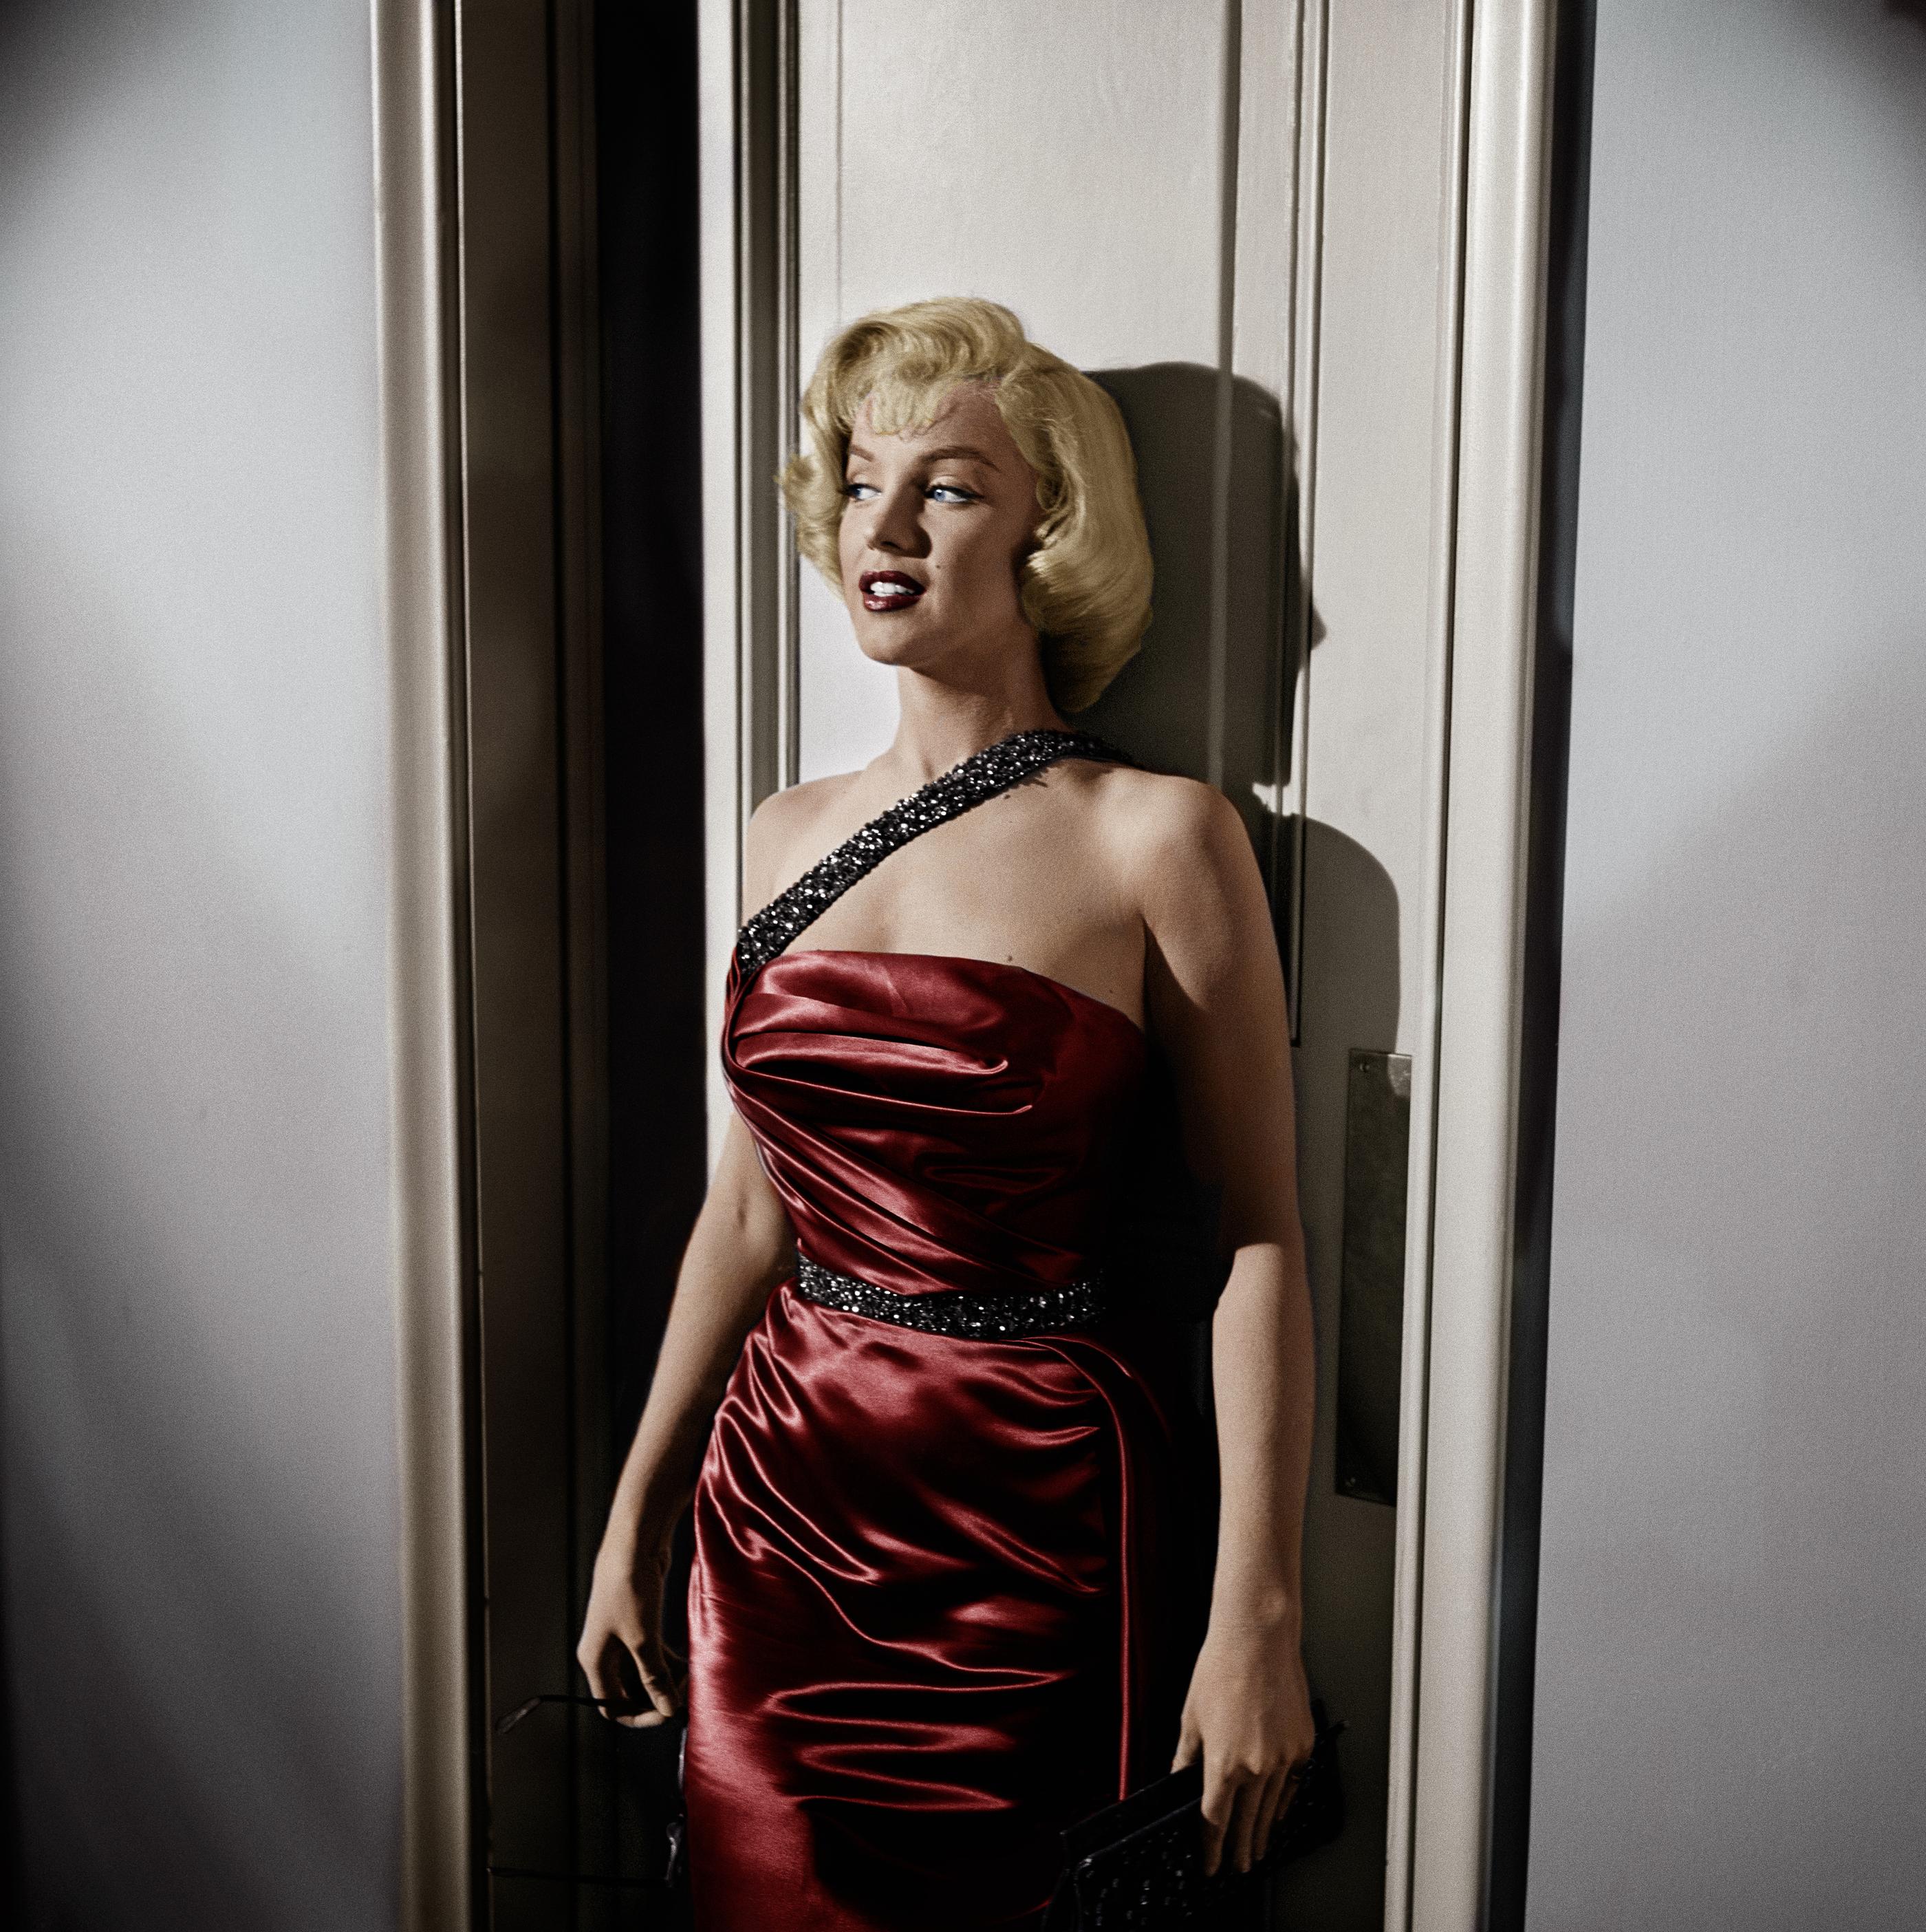 Frank Worth Portrait Photograph - Marilyn Monroe on the Set of "How to Marry a Millionaire"